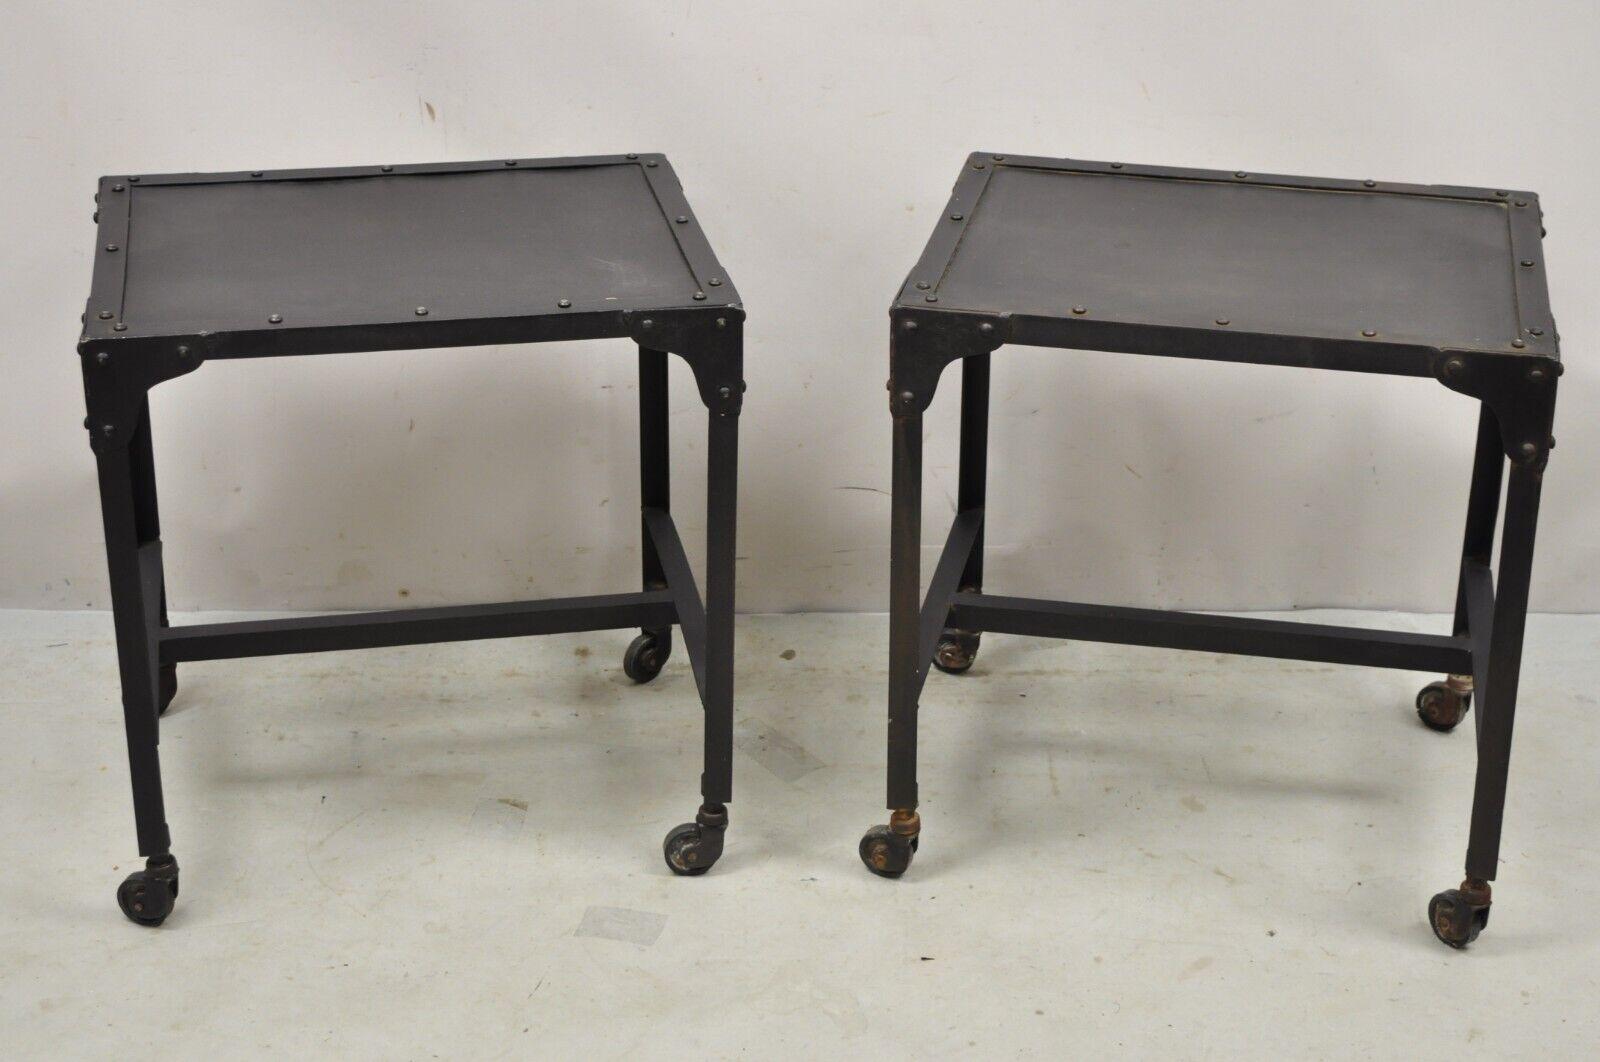 Decorator Industrial Vintage Style Steel Metal Side Tables on Wheels - a Pair. Item features rolling casters, steel metal frames, stretcher base, riveted construction, very nice set, great style and form. 
circa late 20th - early 21st century.